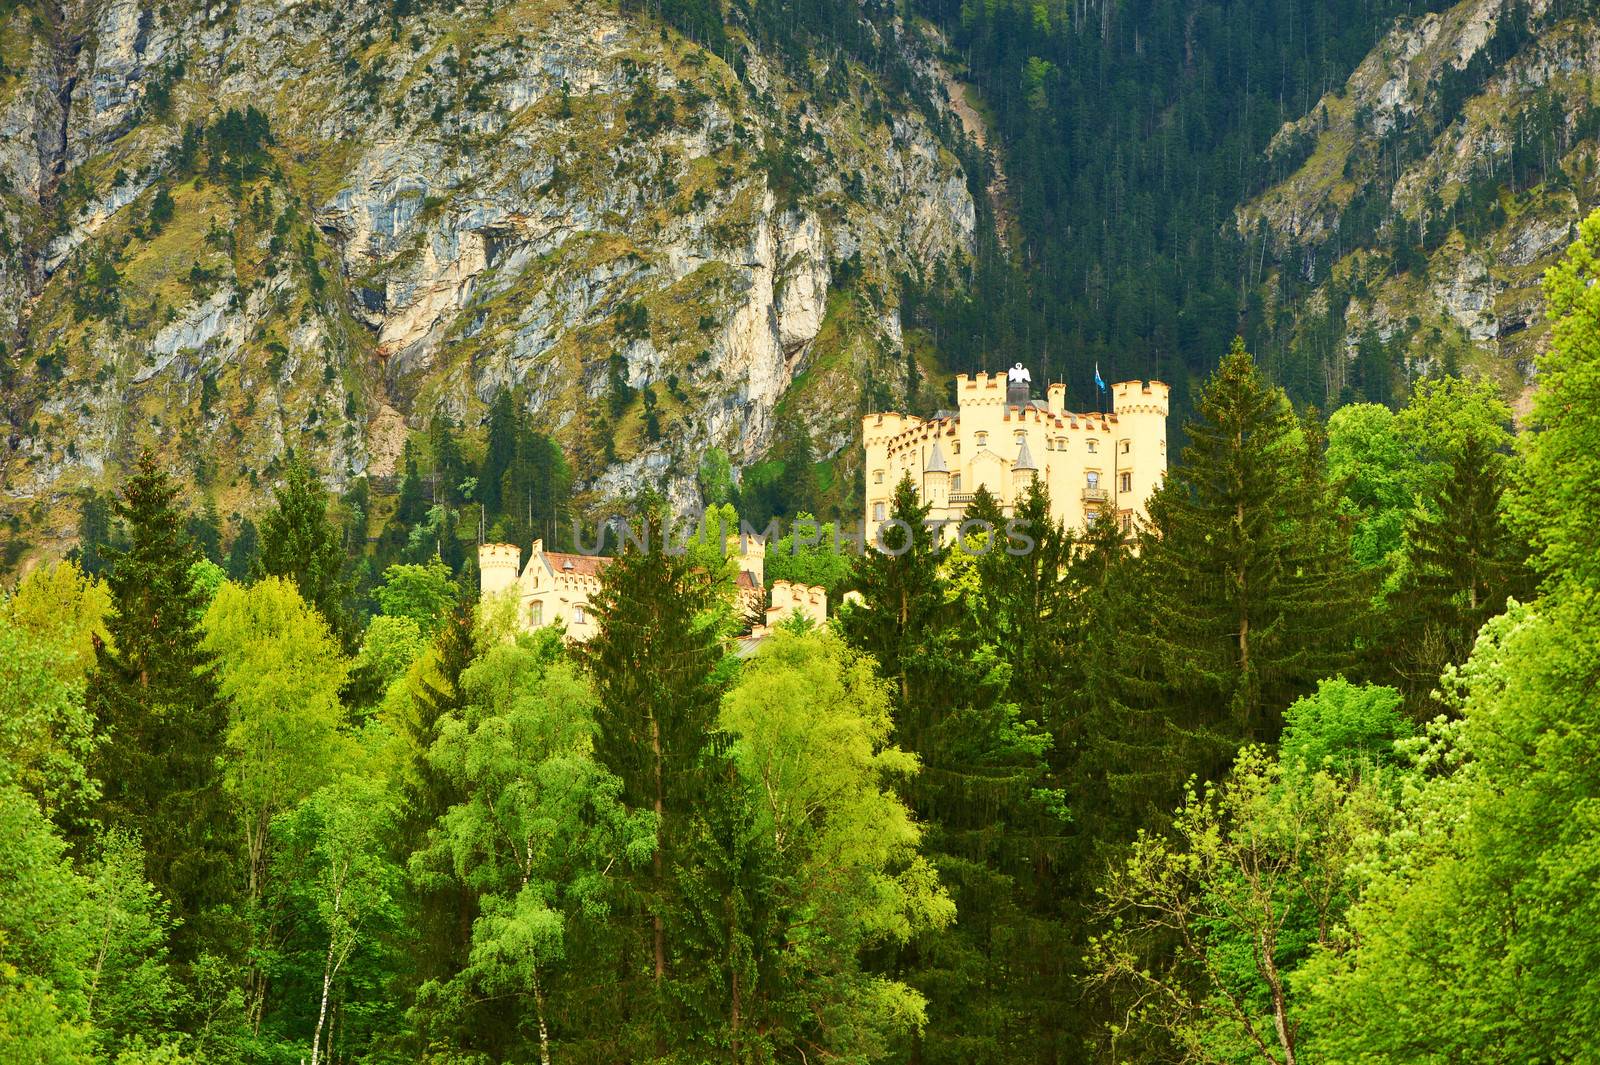 The castle of Hohenschwangau in Germany by haveseen